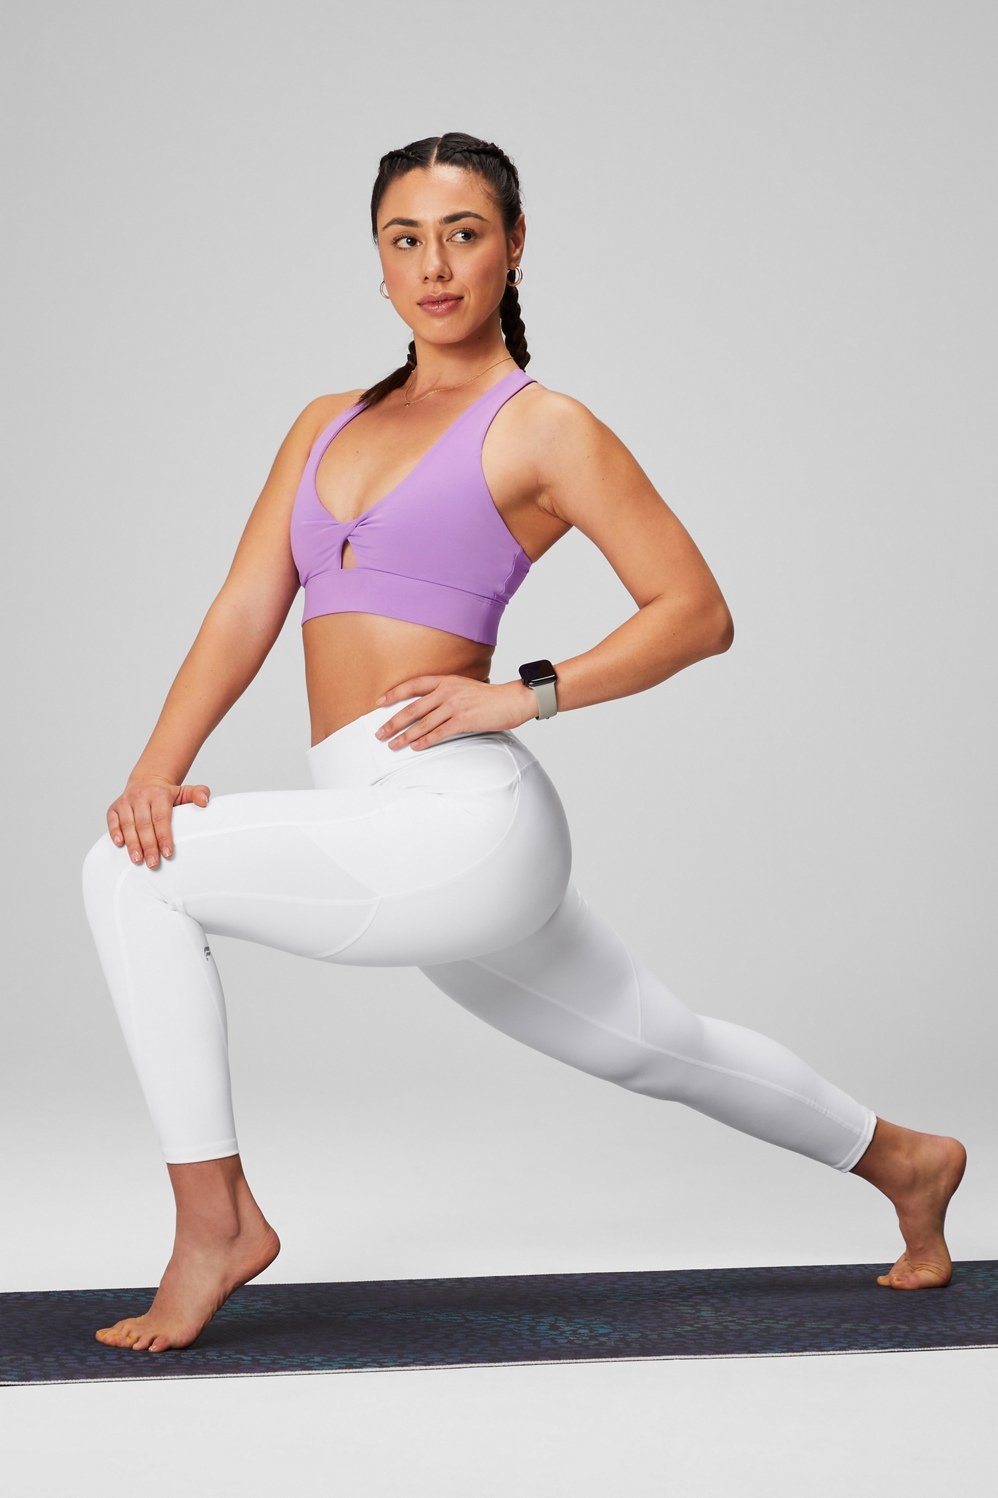 Oasis PureLuxe High-Waisted 7/8 Legging, 46% OFF